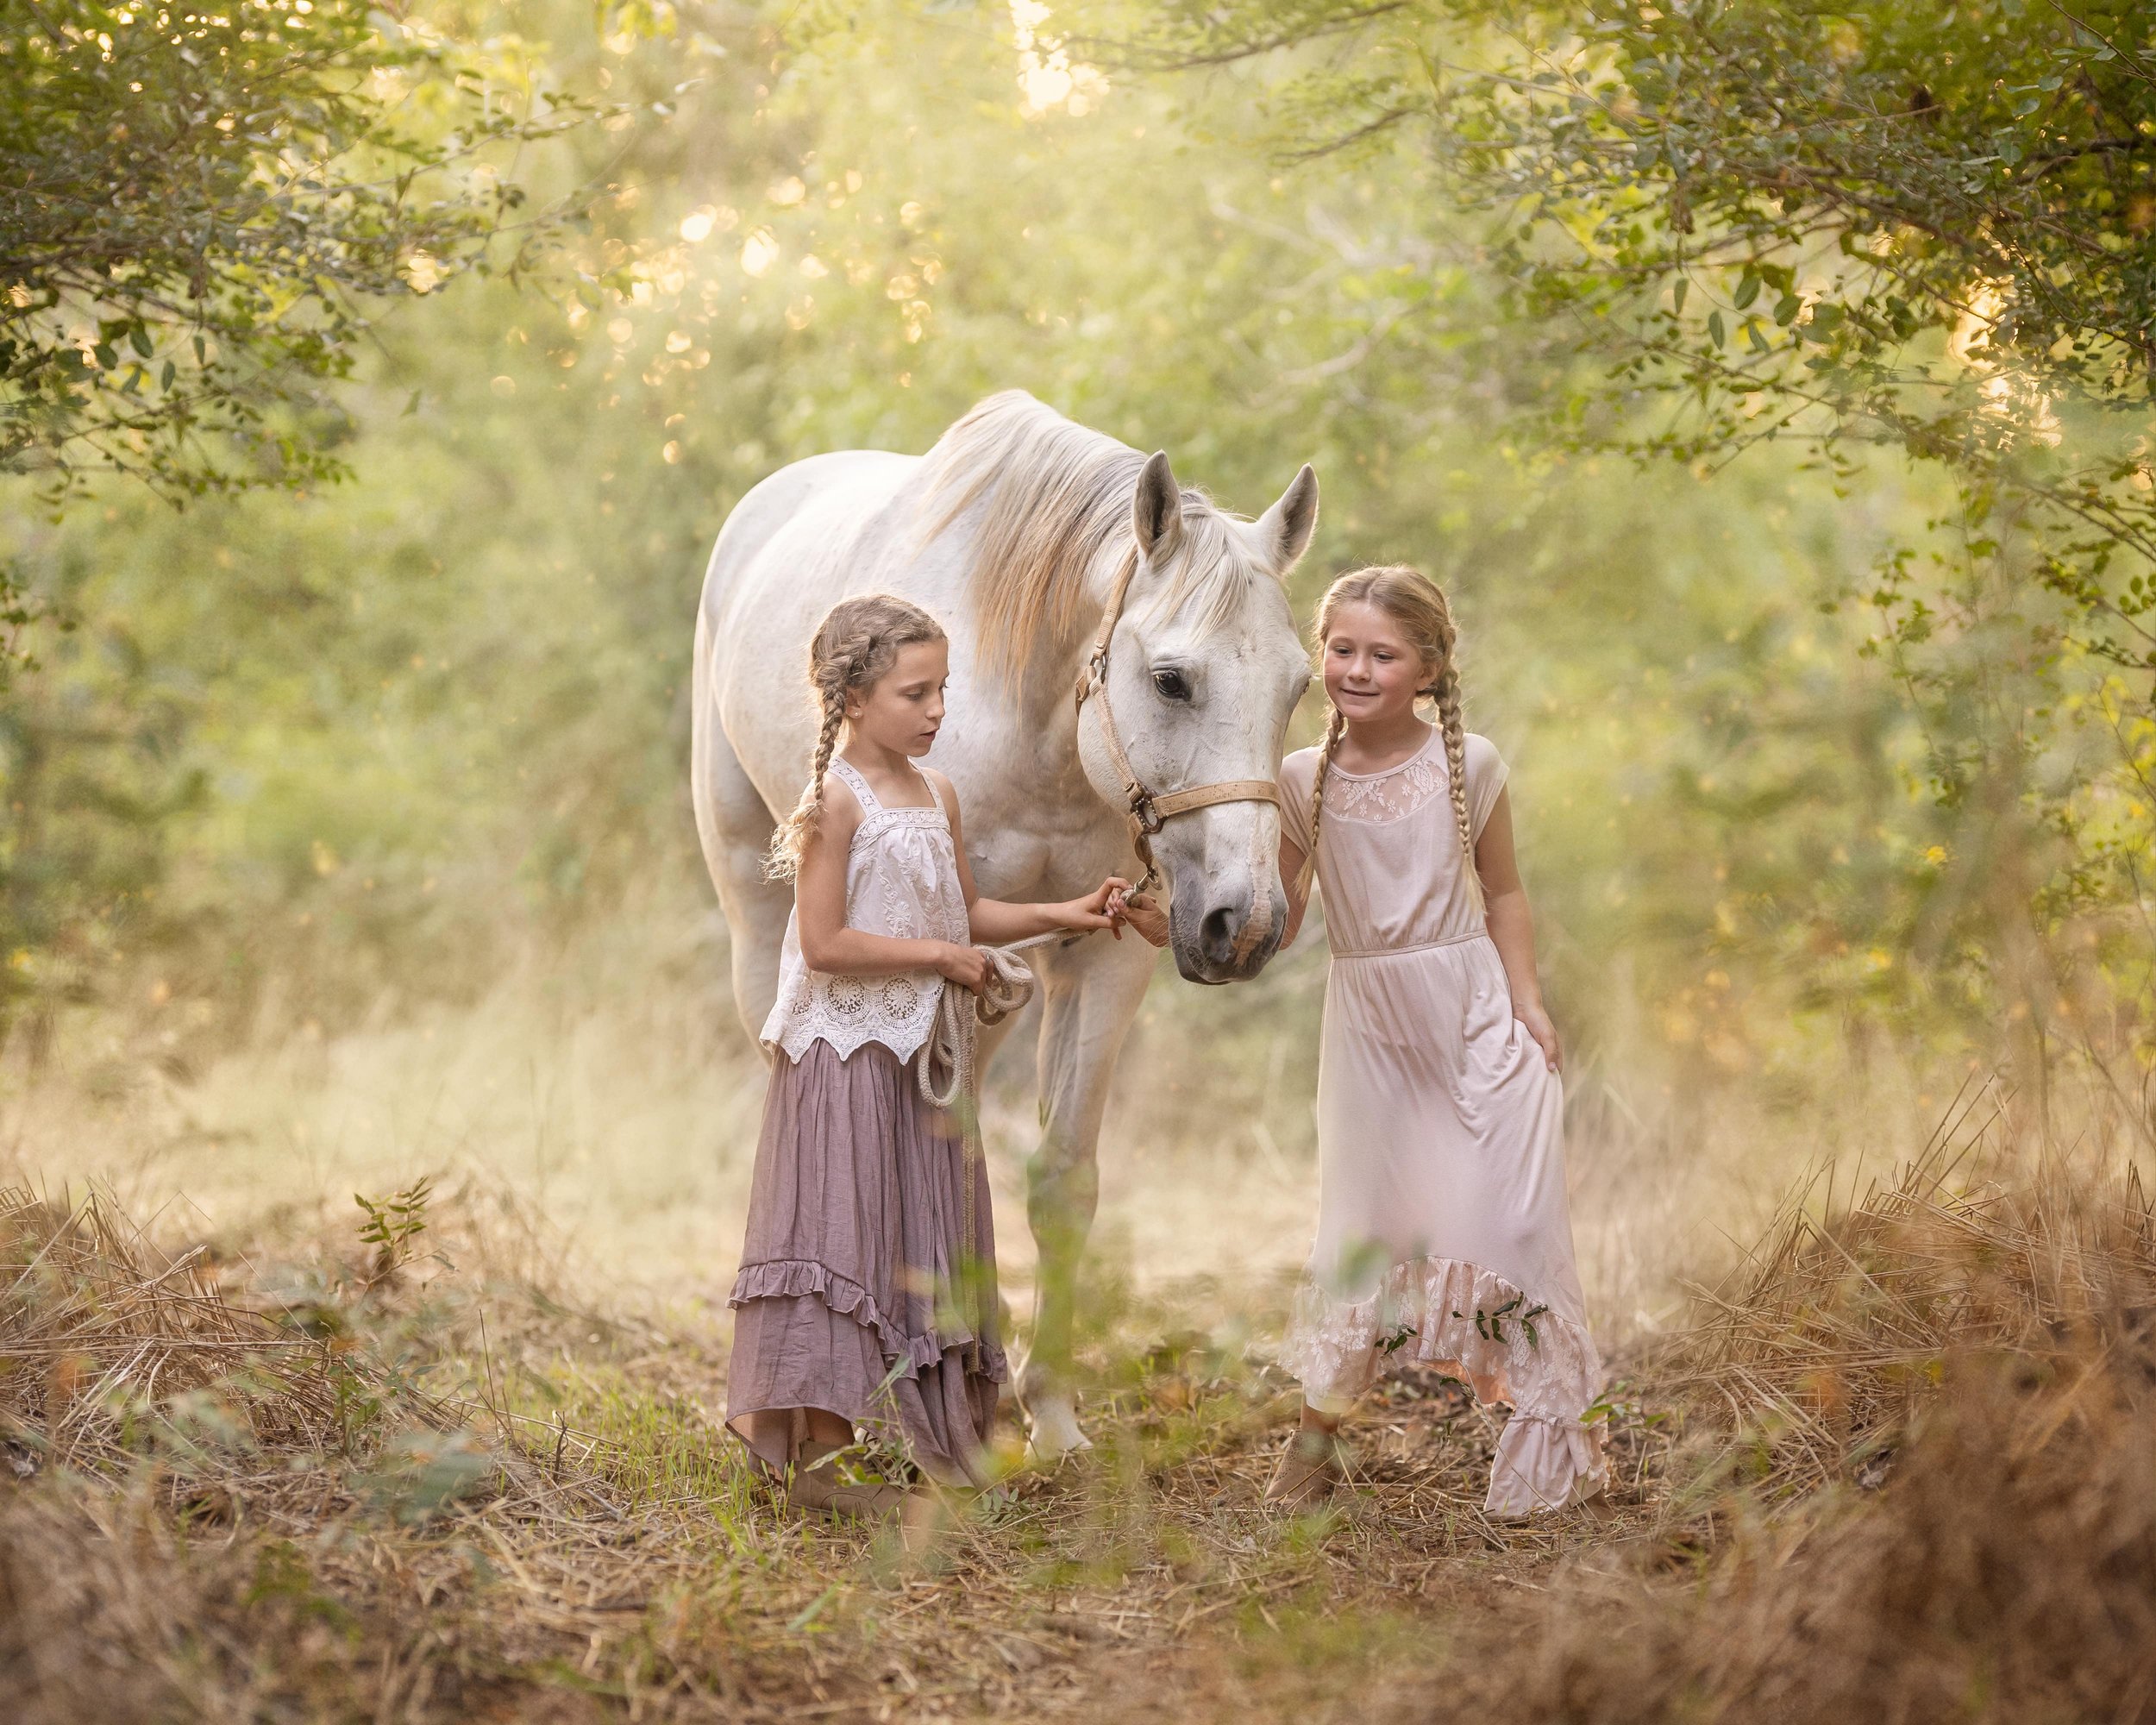 Angie Perisse - Portfolio - Magical Childhood- Photography Session for Kids, Pets, Horses, Family and Studio in Vernon, Texas, USA.